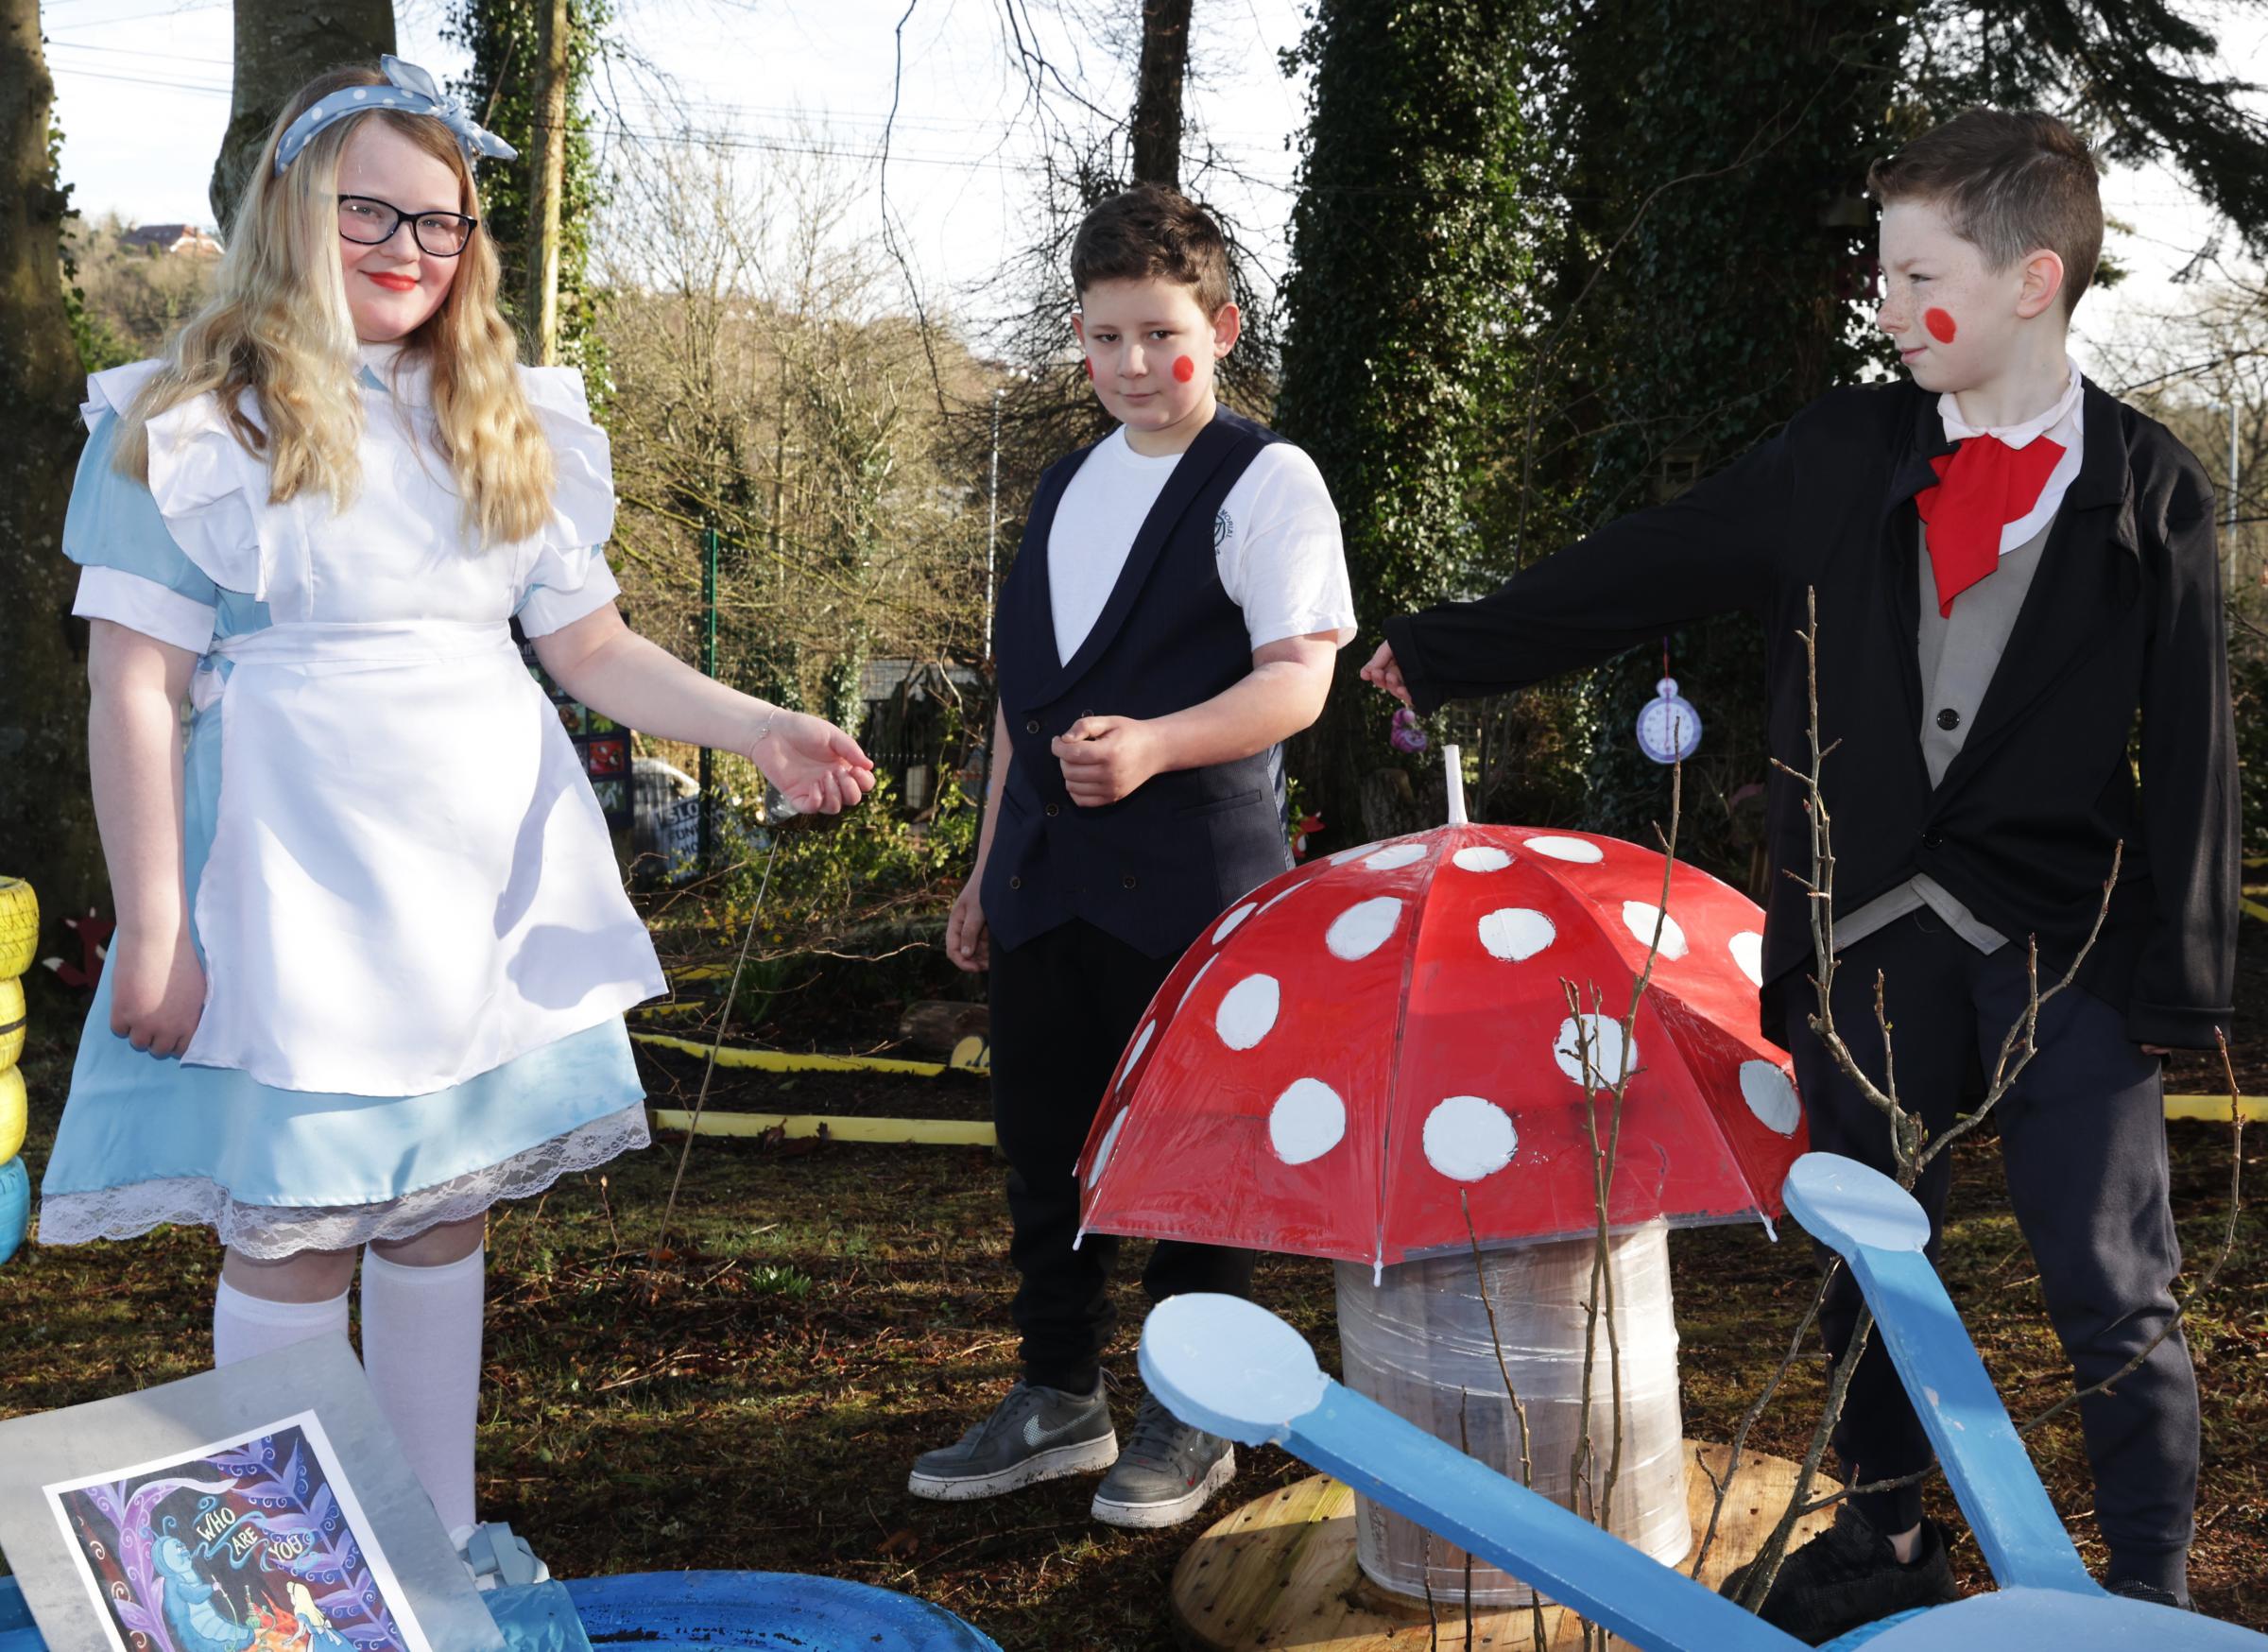 Robyn Bailie, Brooklyn Wills and Cody Kavanagh, who are taking part in The Alice In Wonderland event at the school.